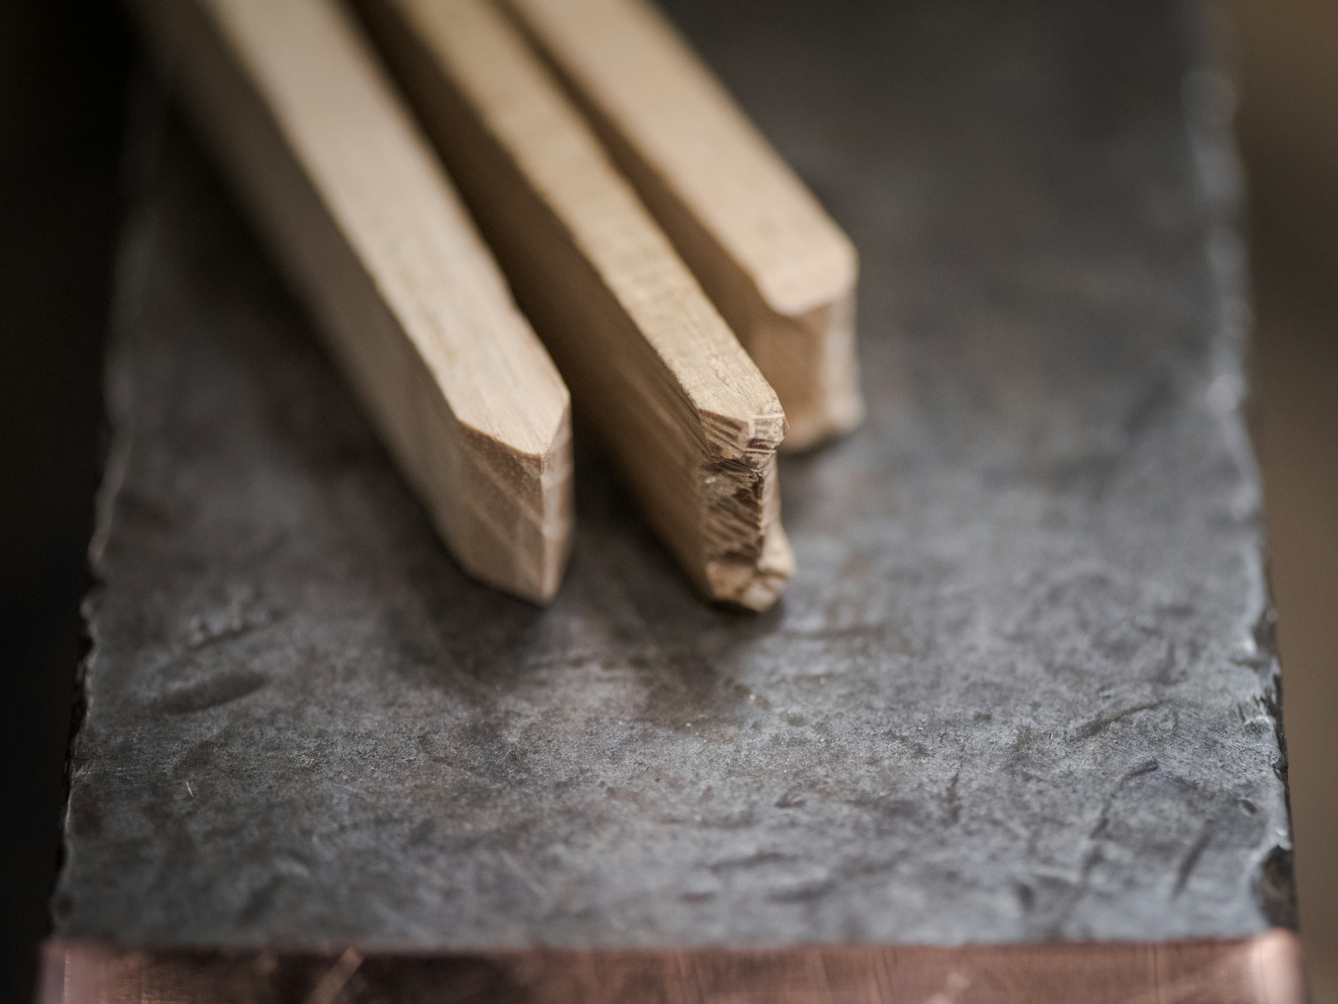 Photograph of specially crafted wooden sticks resting side by side on a metal surface.  Each stick will make a different impression on solidified lead. Two of the sticks used in tandem will create a cross, and the third stick will create a line.